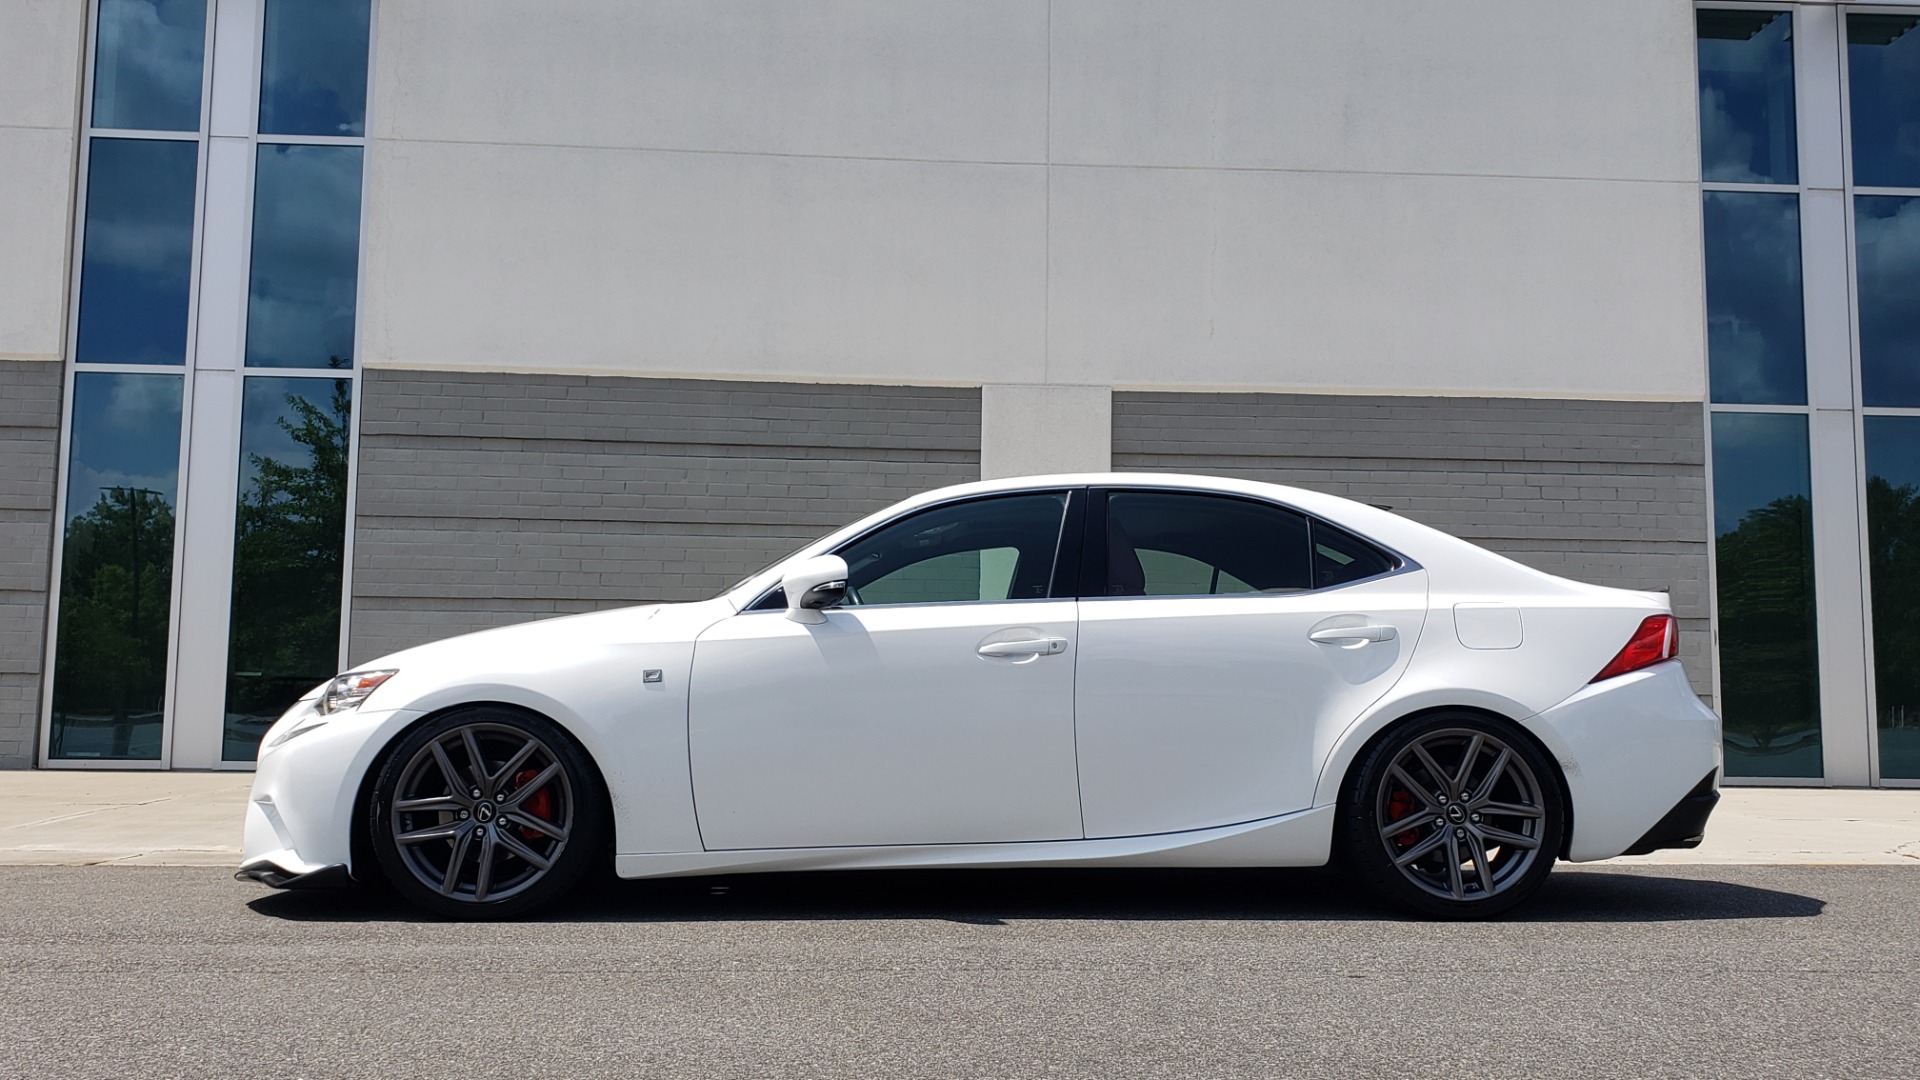 Used 2014 Lexus IS 250 F-SPORT SEDAN / BLIND SPOT MONITOR / REARVIEW / 18IN WHEELS for sale Sold at Formula Imports in Charlotte NC 28227 6